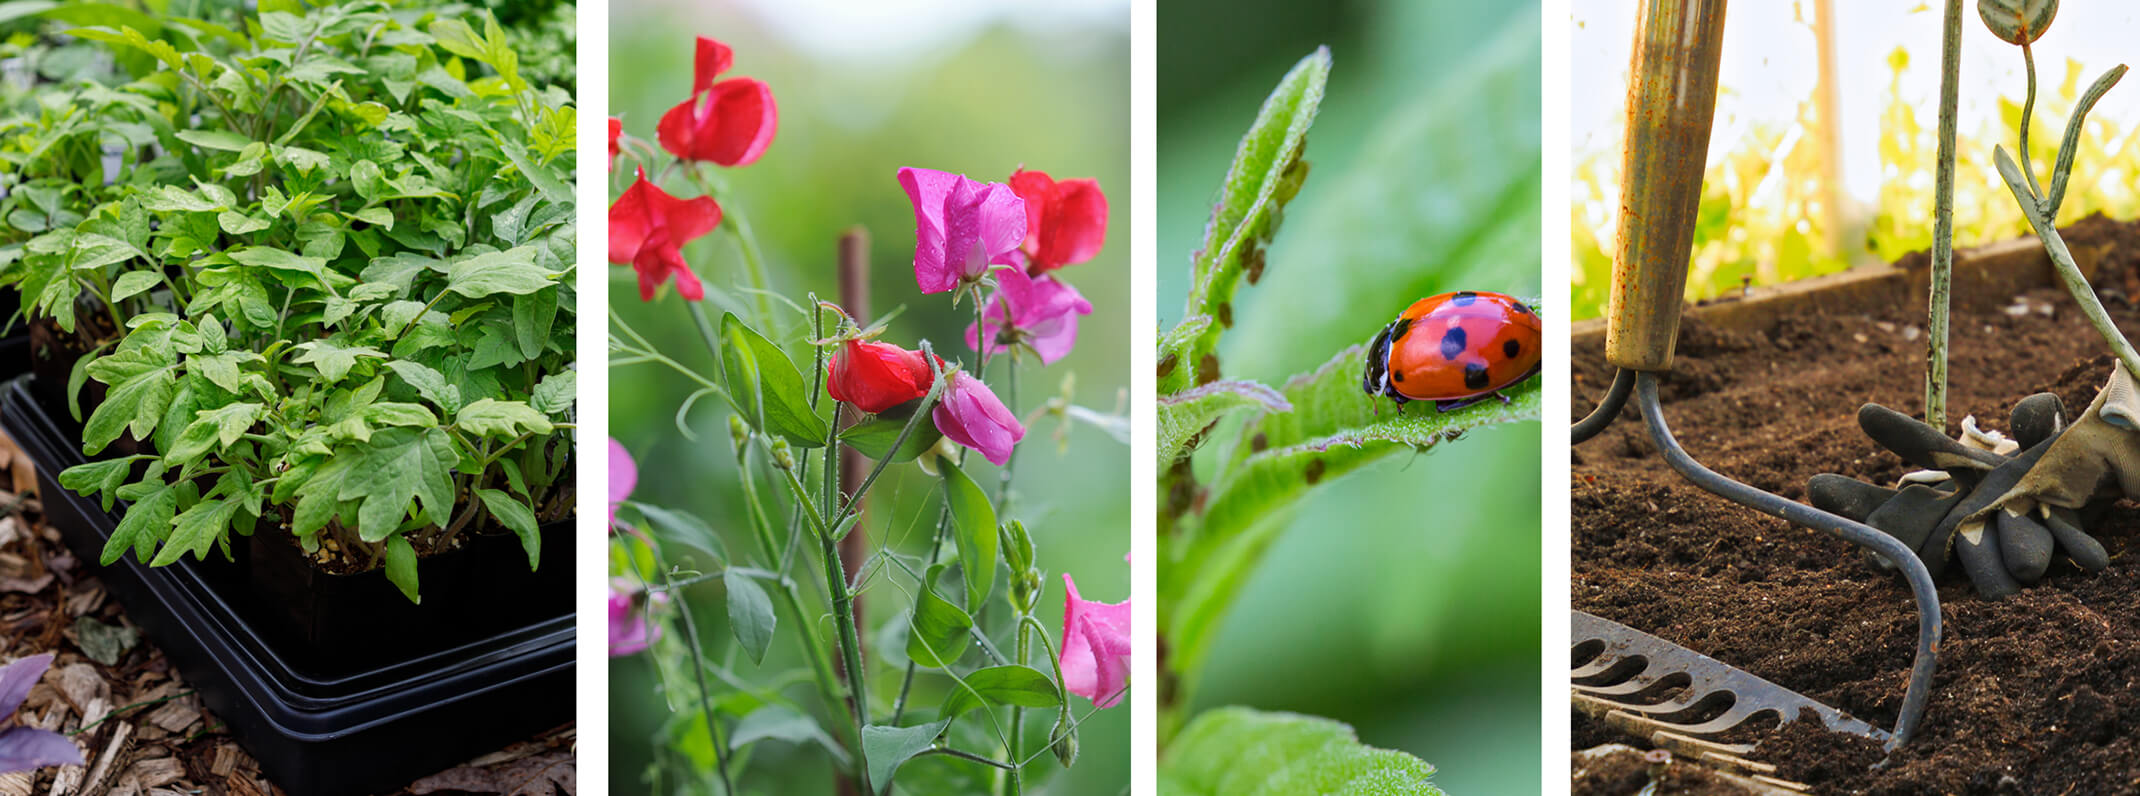 March gardening calender seedlings, sweet peas, lady bug with aphids and raisded garden